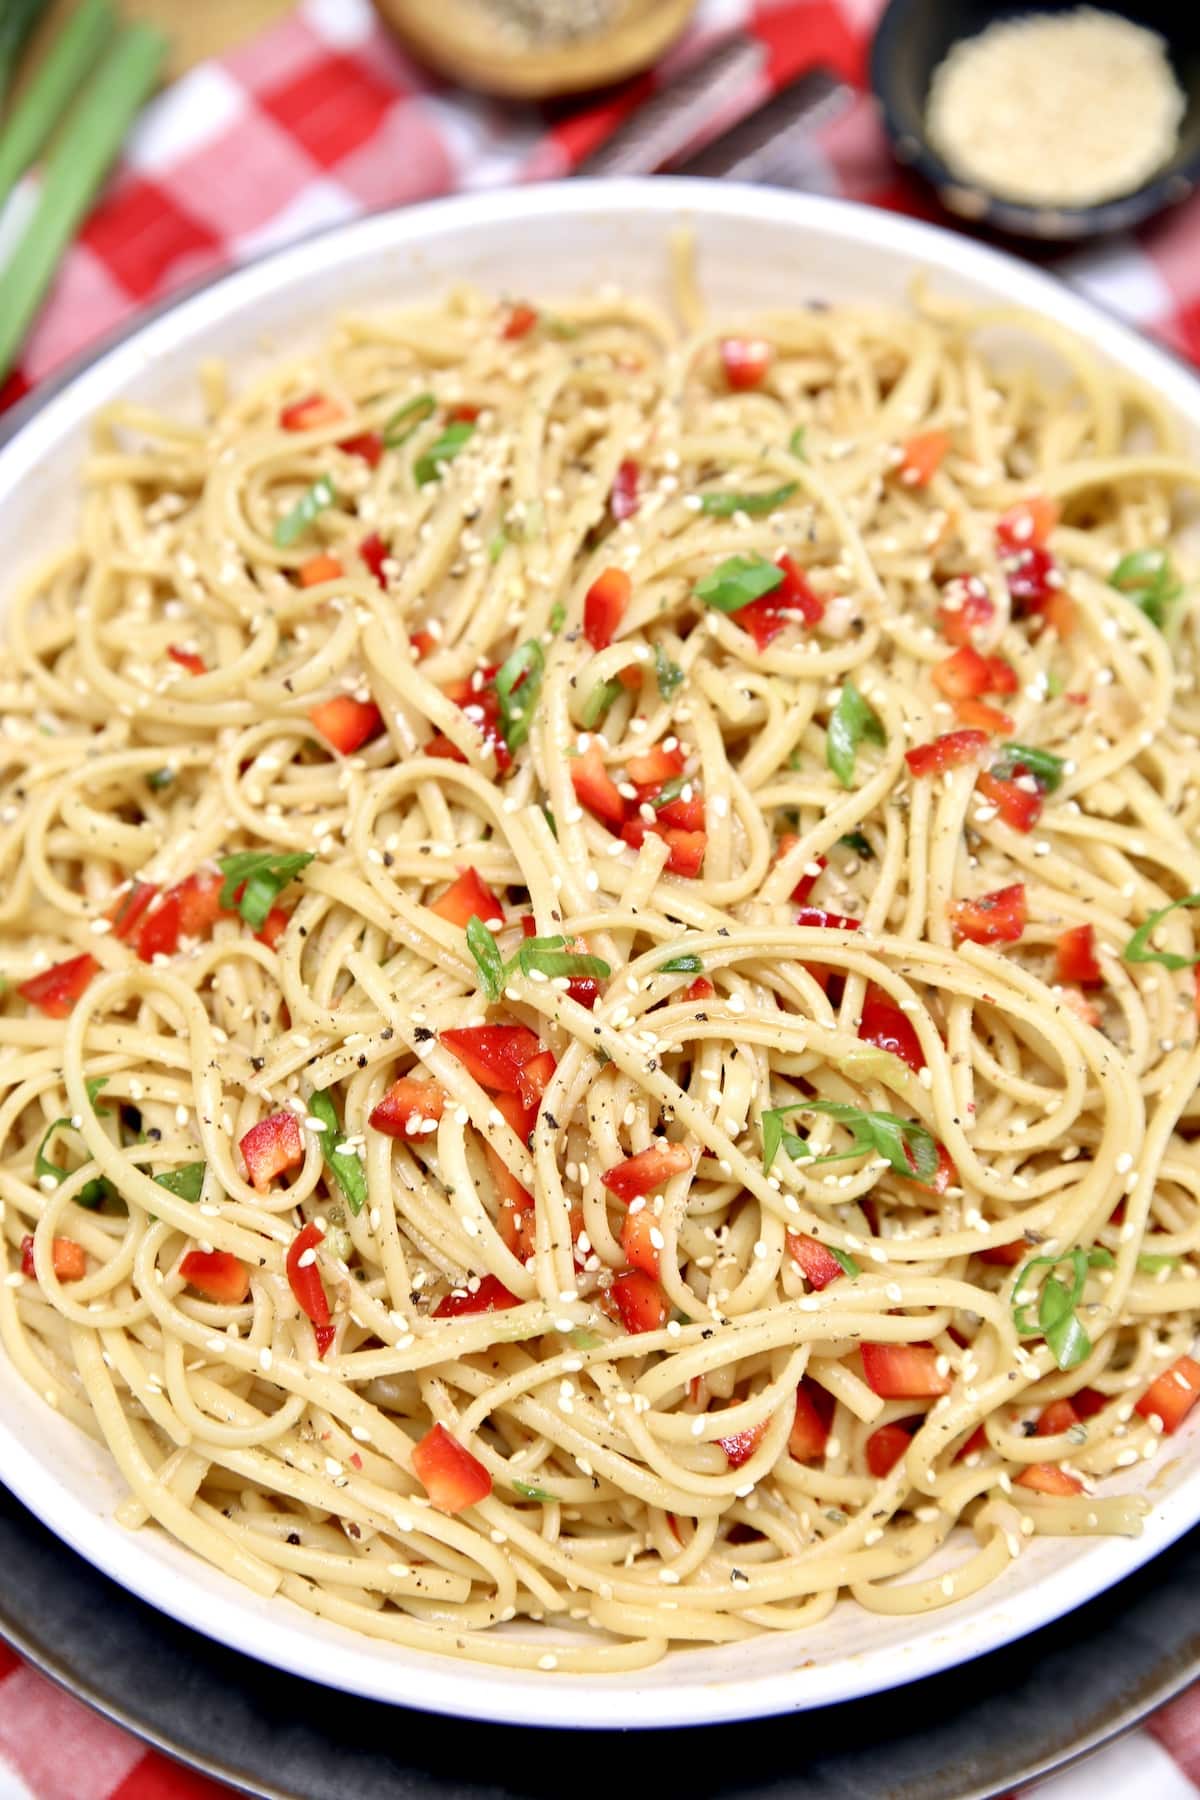 Pasta salad with red bell peppers and green onions.